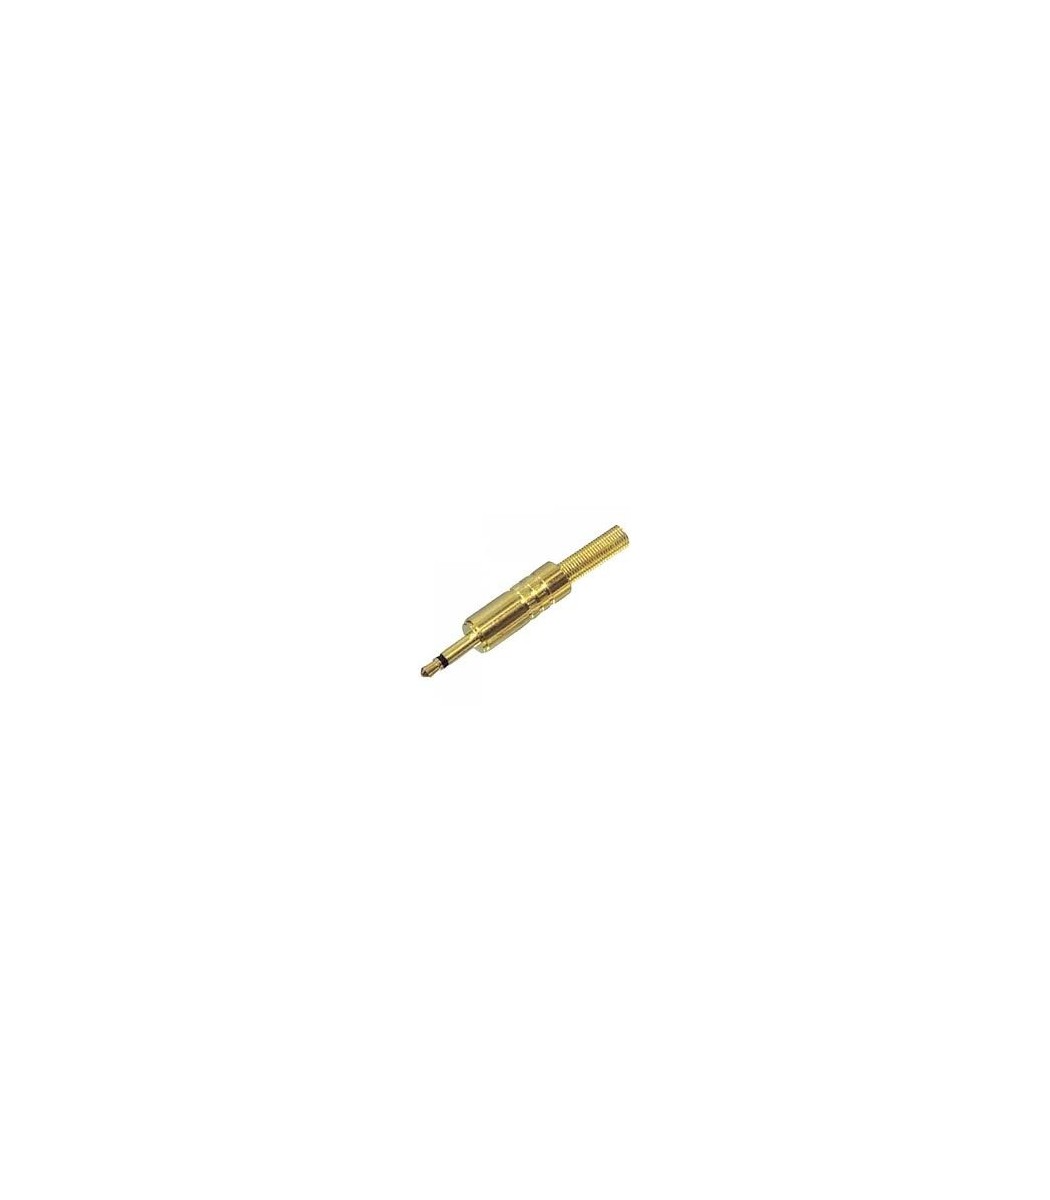 PIN MONO 3.5mm² METALGOLD-PLATED D011G LZ-LNC